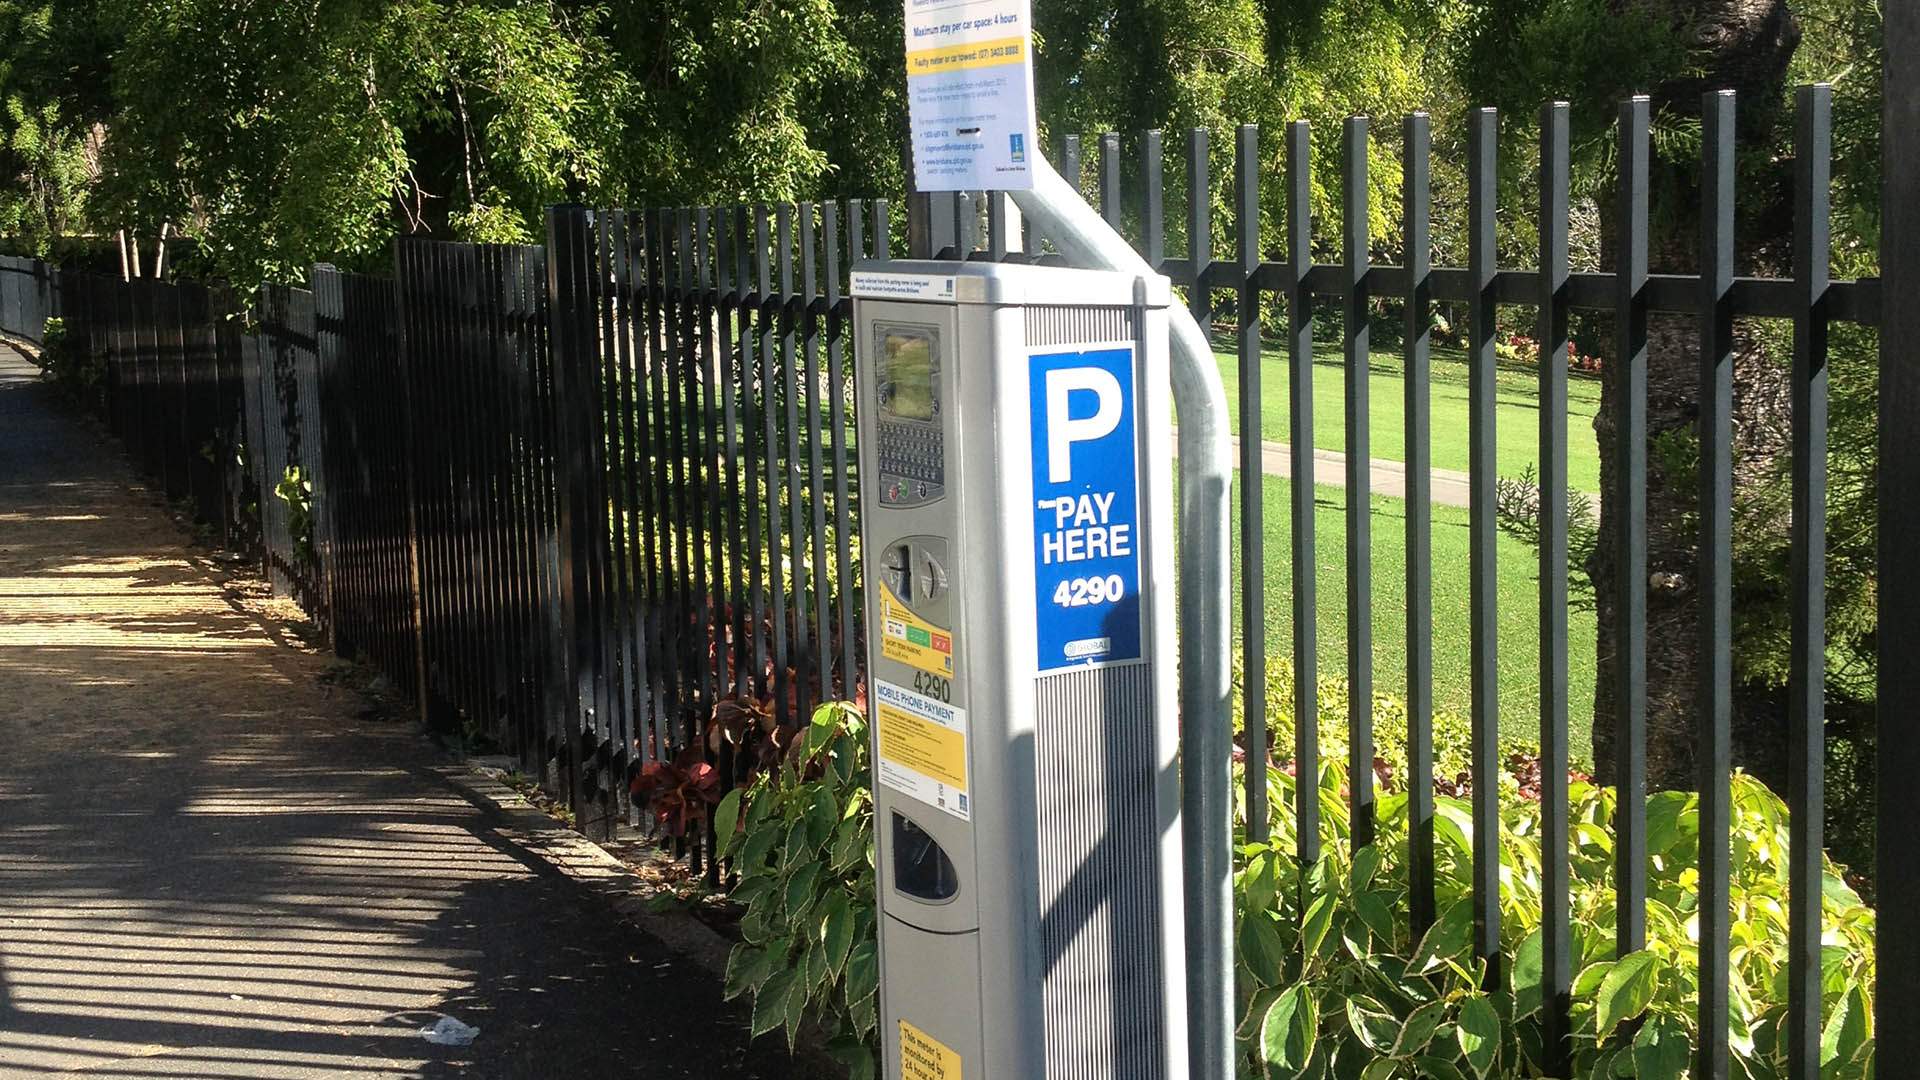 Brisbane City Council Is Keeping the City's Parking Meters Switched Off Until the End of March